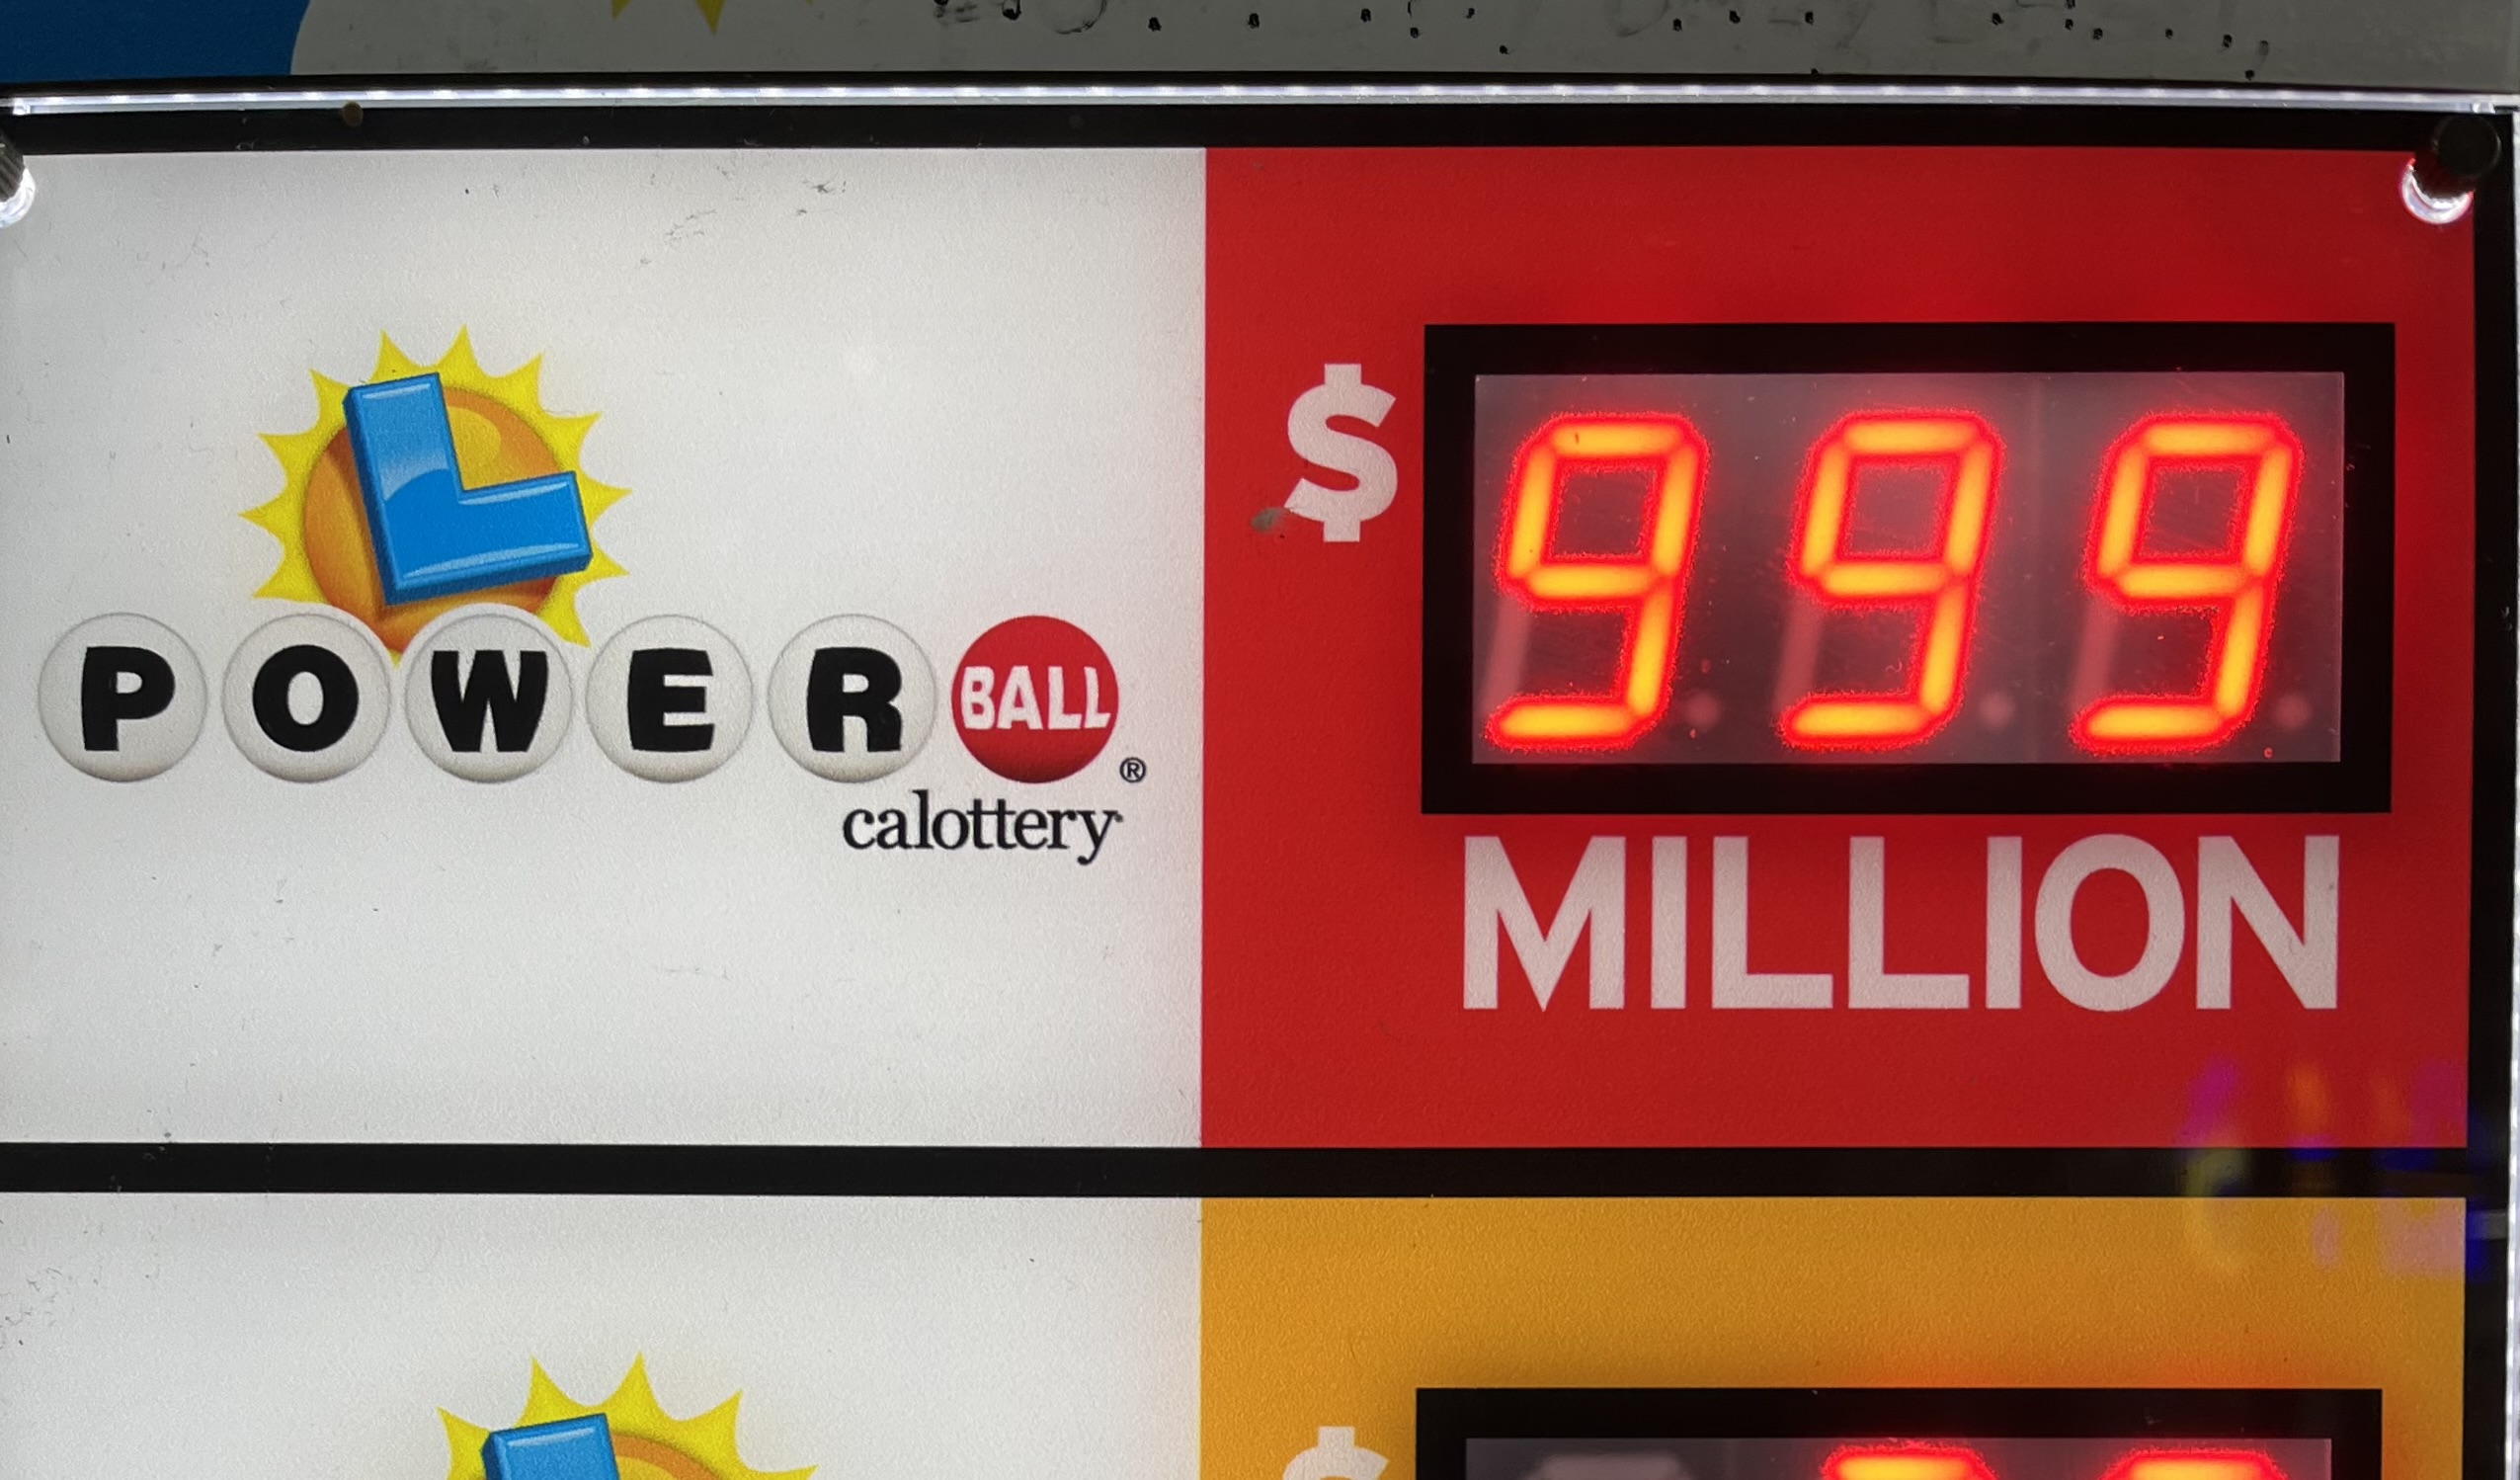 Powerball at Record $1.9 Billion: How a Lottery Jackpot Works - NerdWallet